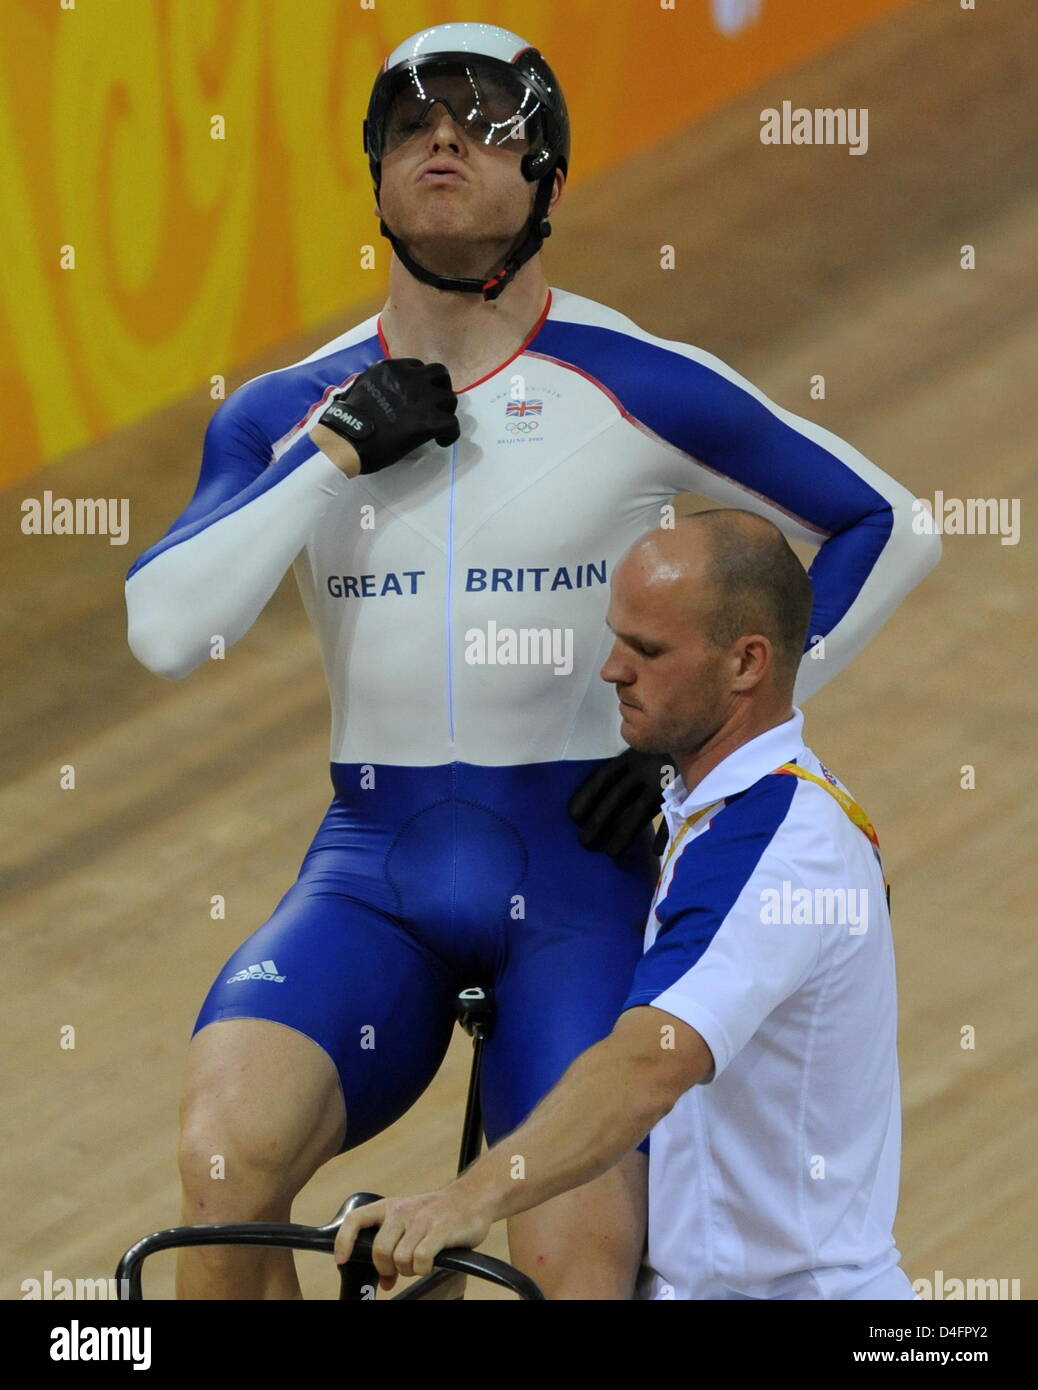 Chris Hoy (L) of Great Britain prior to the start in the Men's Sprint Semifinals in the Cycling - Track competition at Laoshan Velodrome at the Beijing 2008 Olympic Games, Beijing, China, 19 August 2008. Photo: Peer Grimm dpa ###dpa### Stock Photo